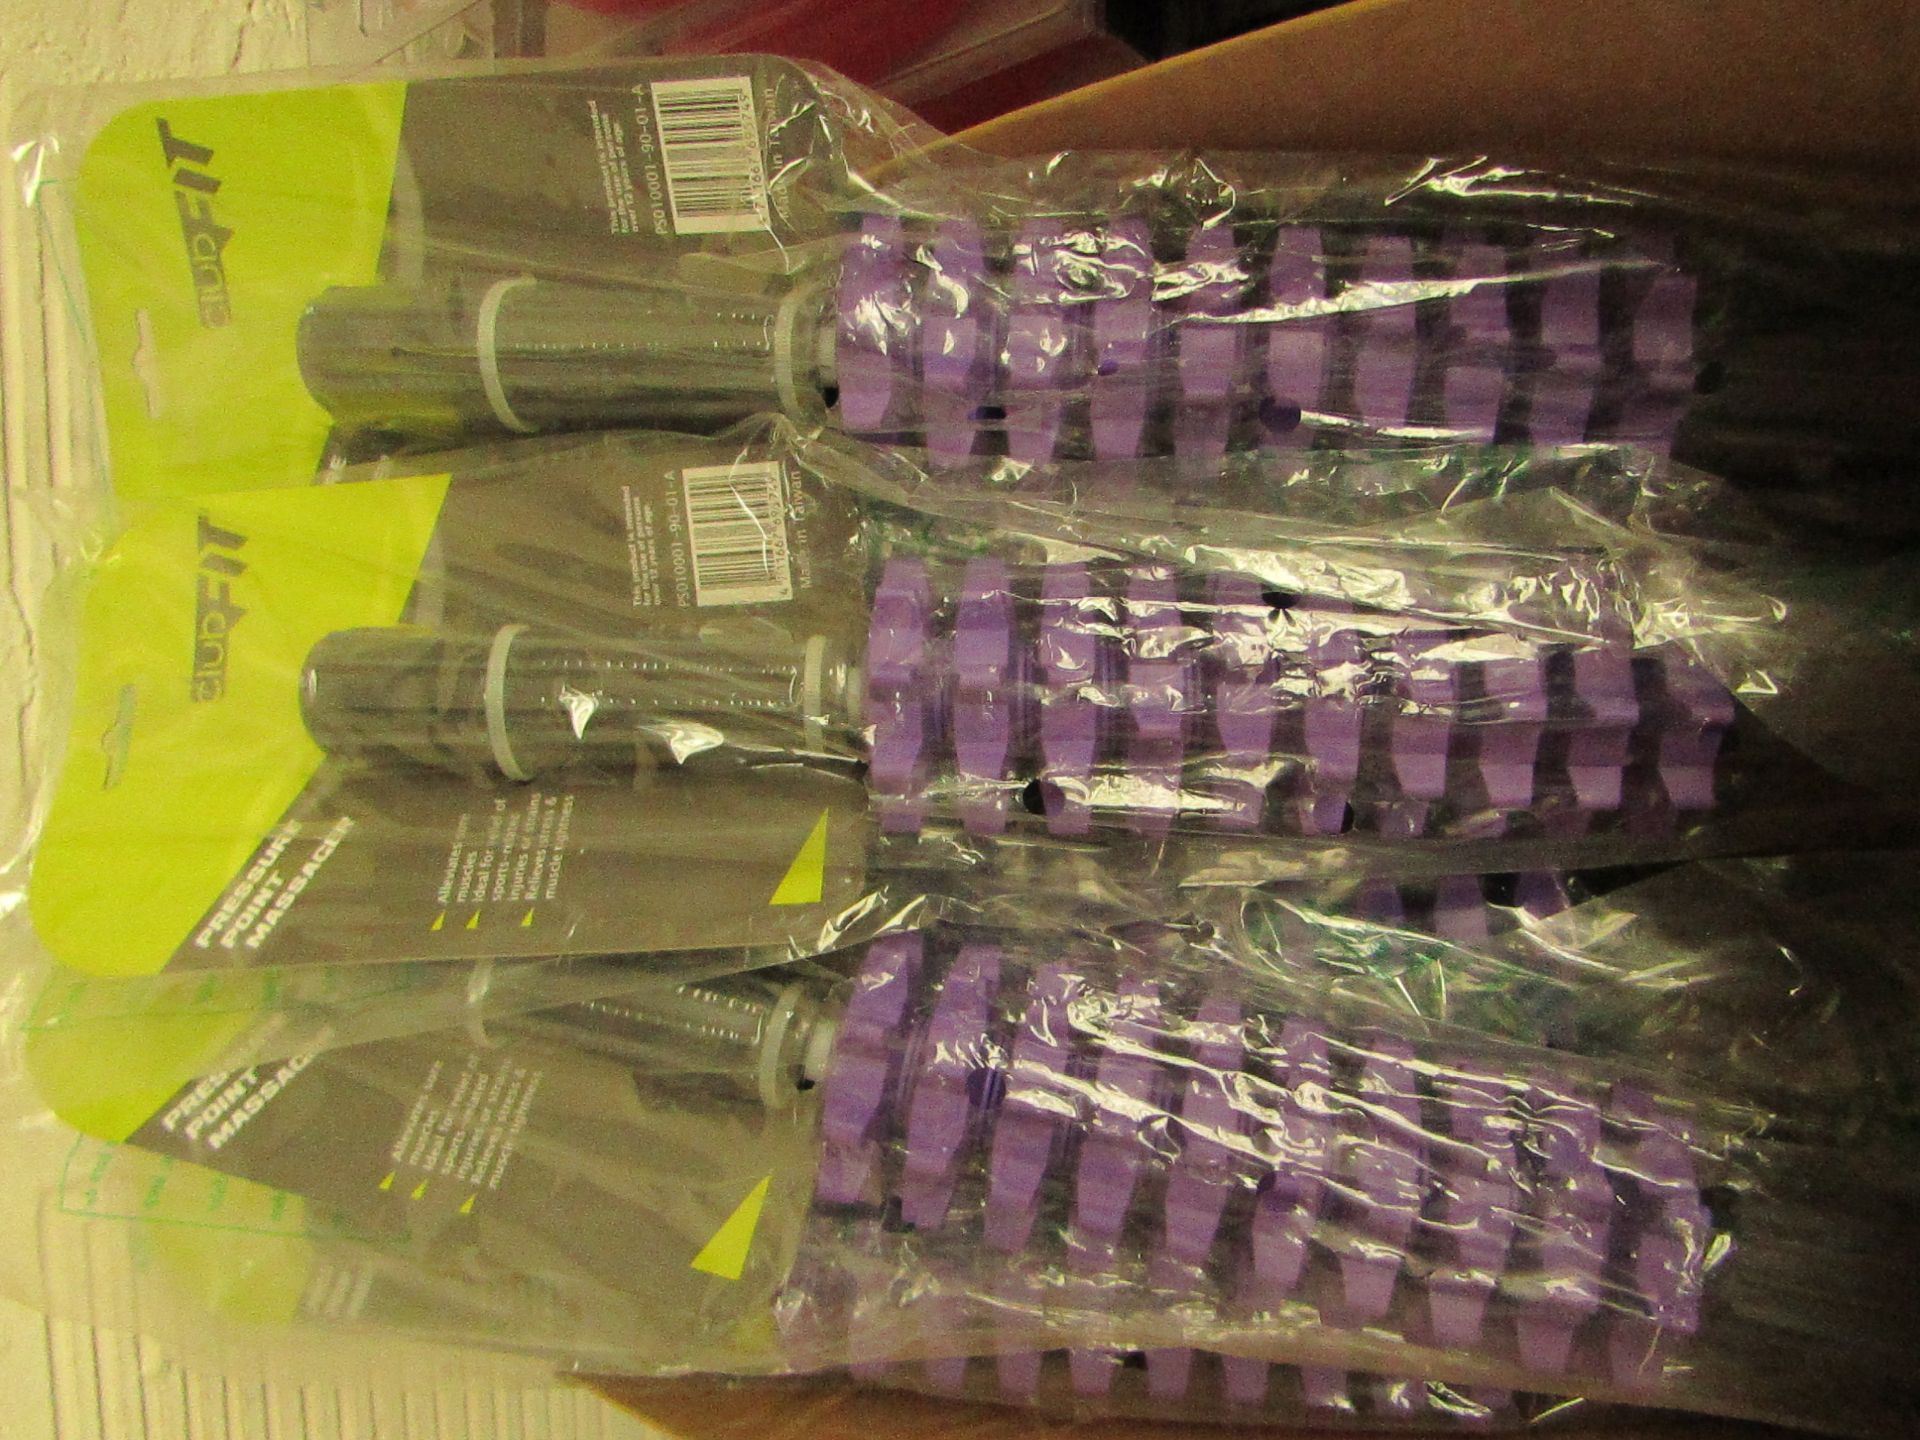 2x Club Fit - Pressure Point Massager (Purple) - New & Packaged.